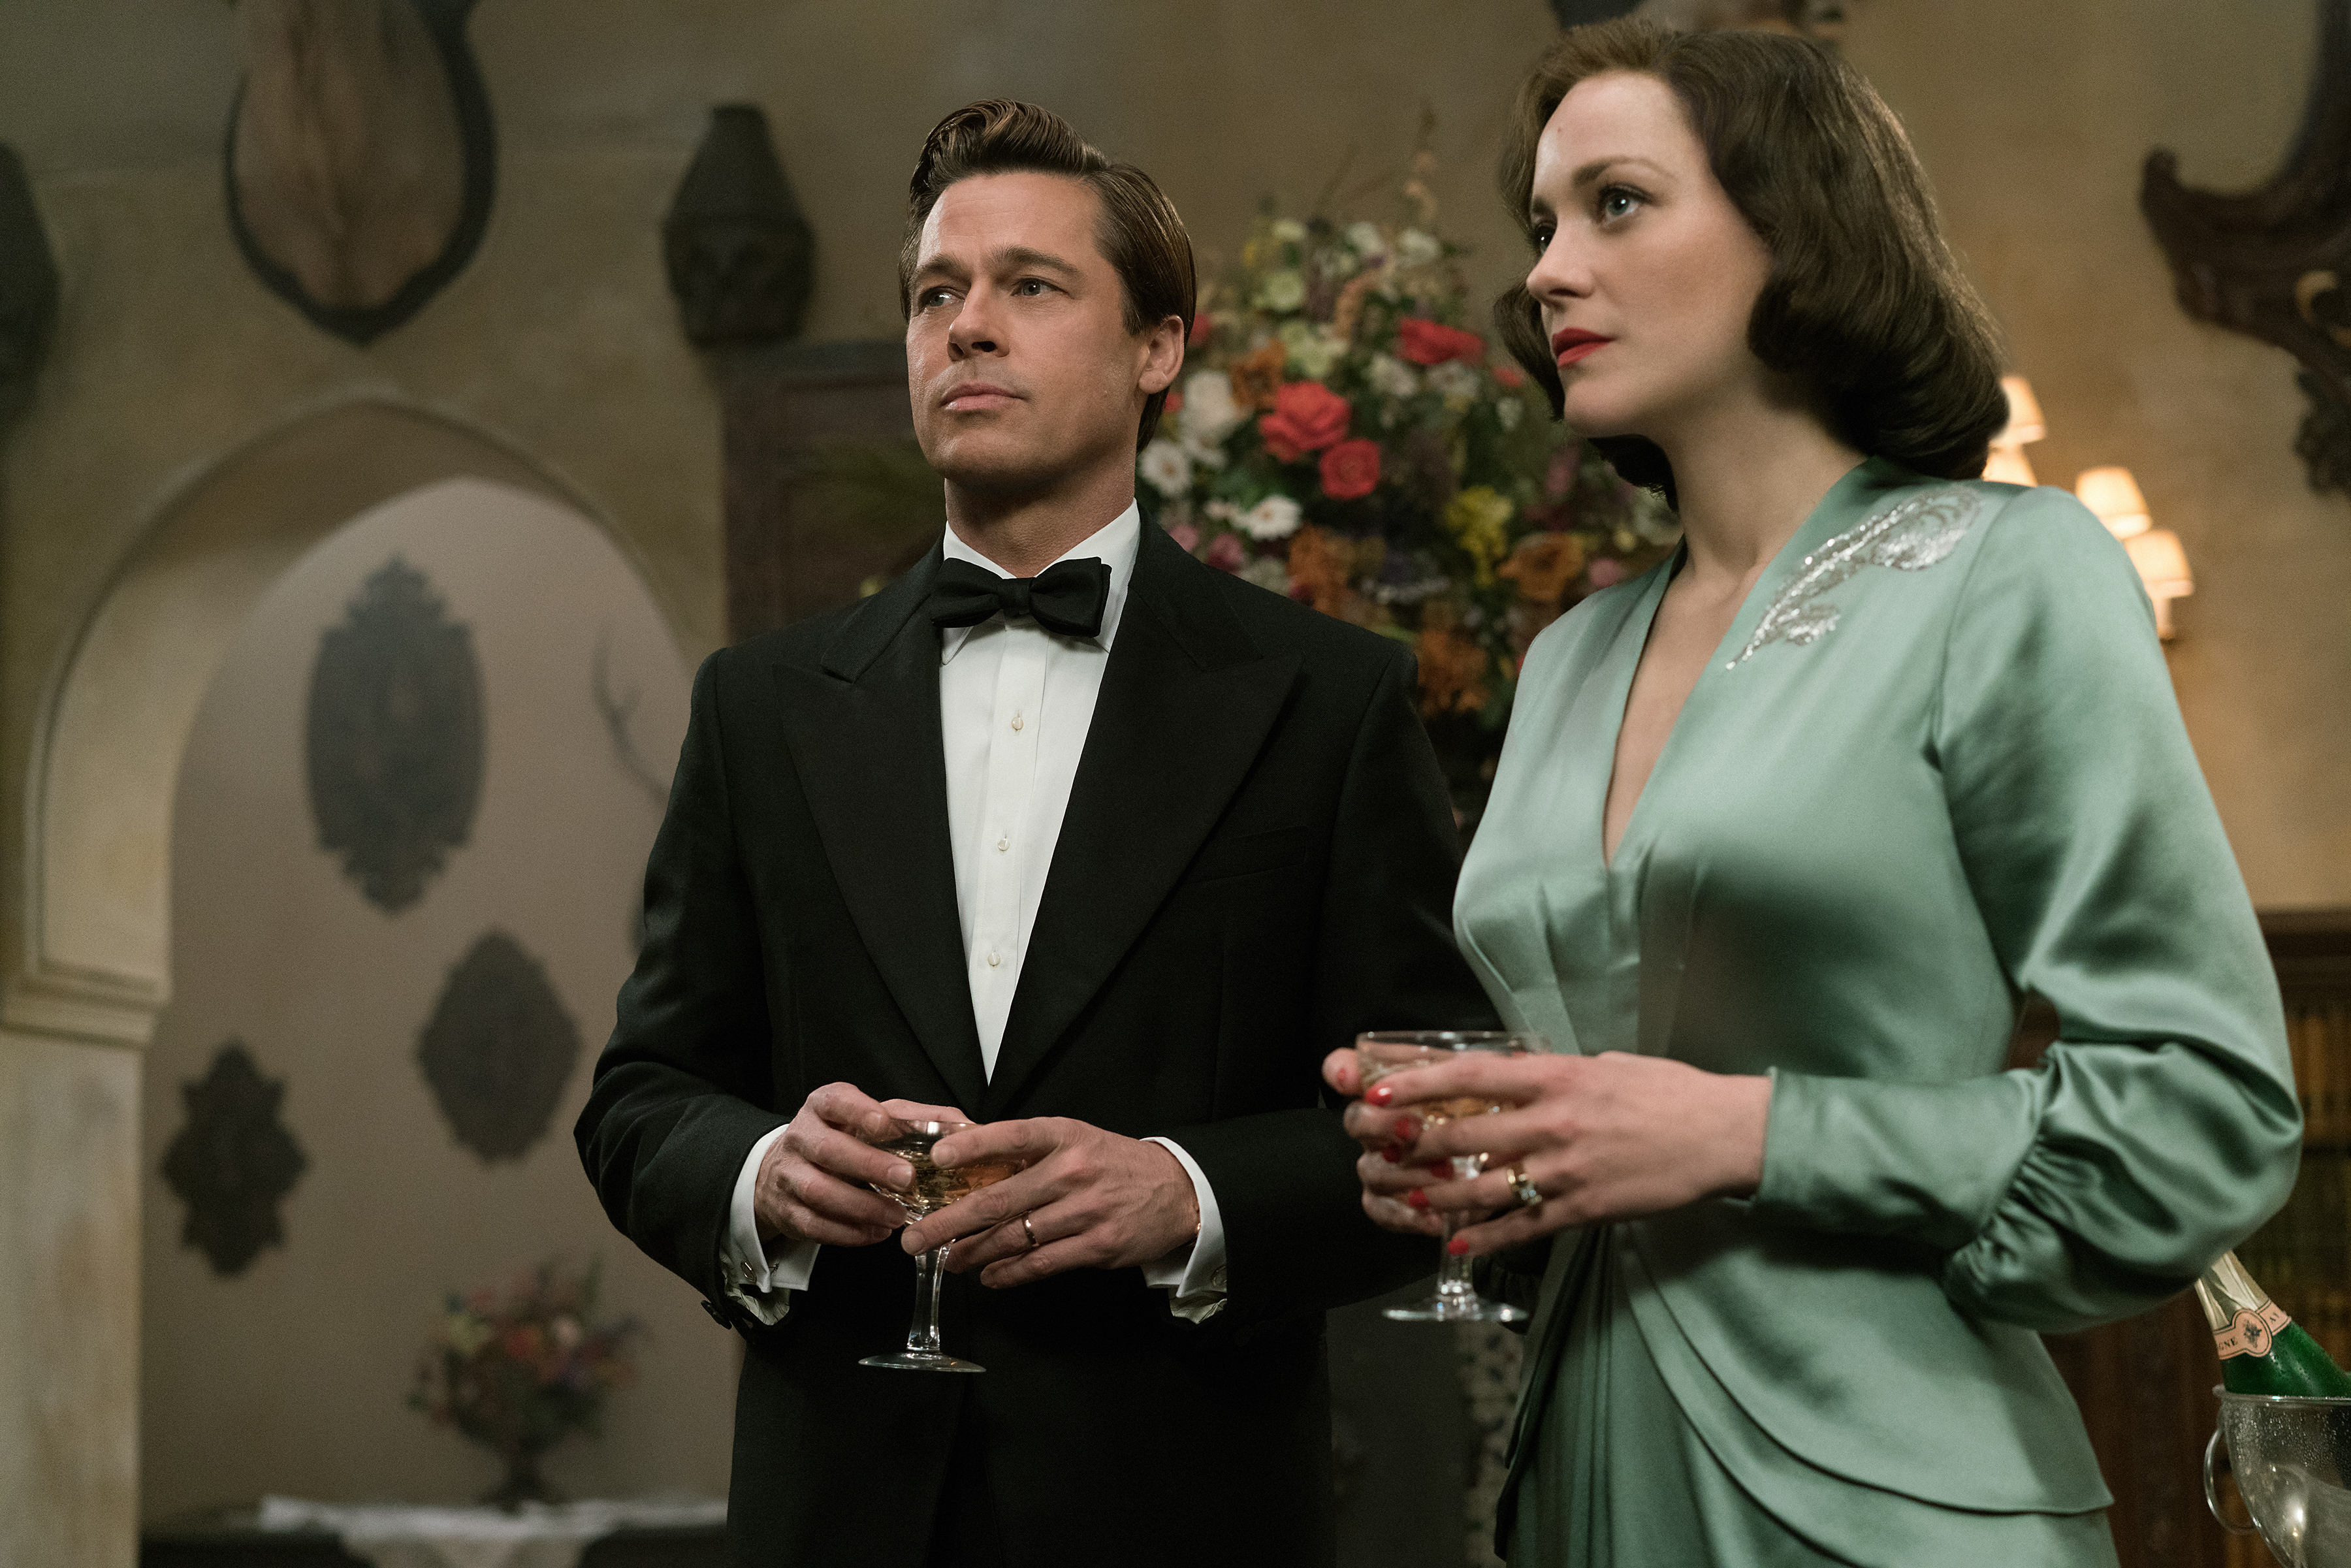 This image released by Paramount Pictures shows Marion Cotillard, right, and Brad Pitt in a scene from, "Allied," in theaters on November 23. (Daniel Smith/Paramount Pictures via AP)